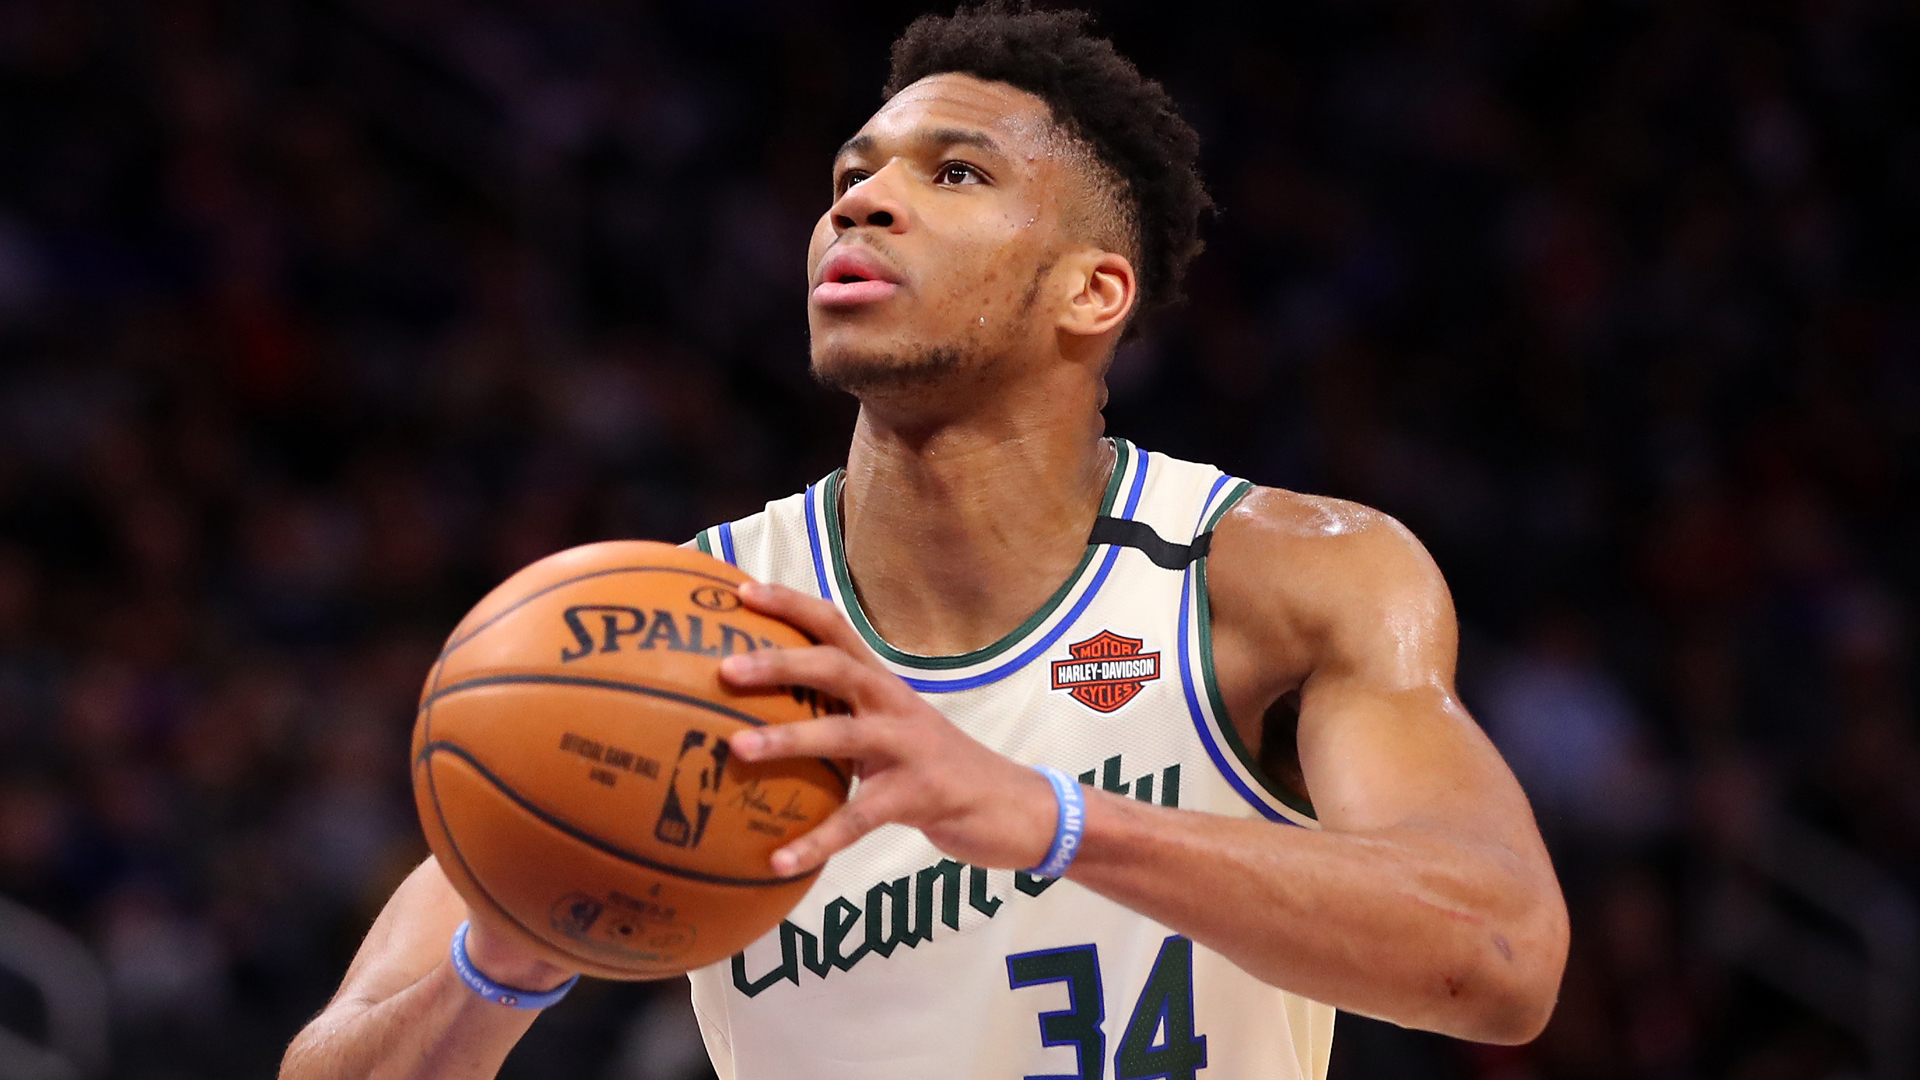 Milwaukee Bucks star Giannis Antetokounmpo had a double-double in a win over the Detroit Pistons.